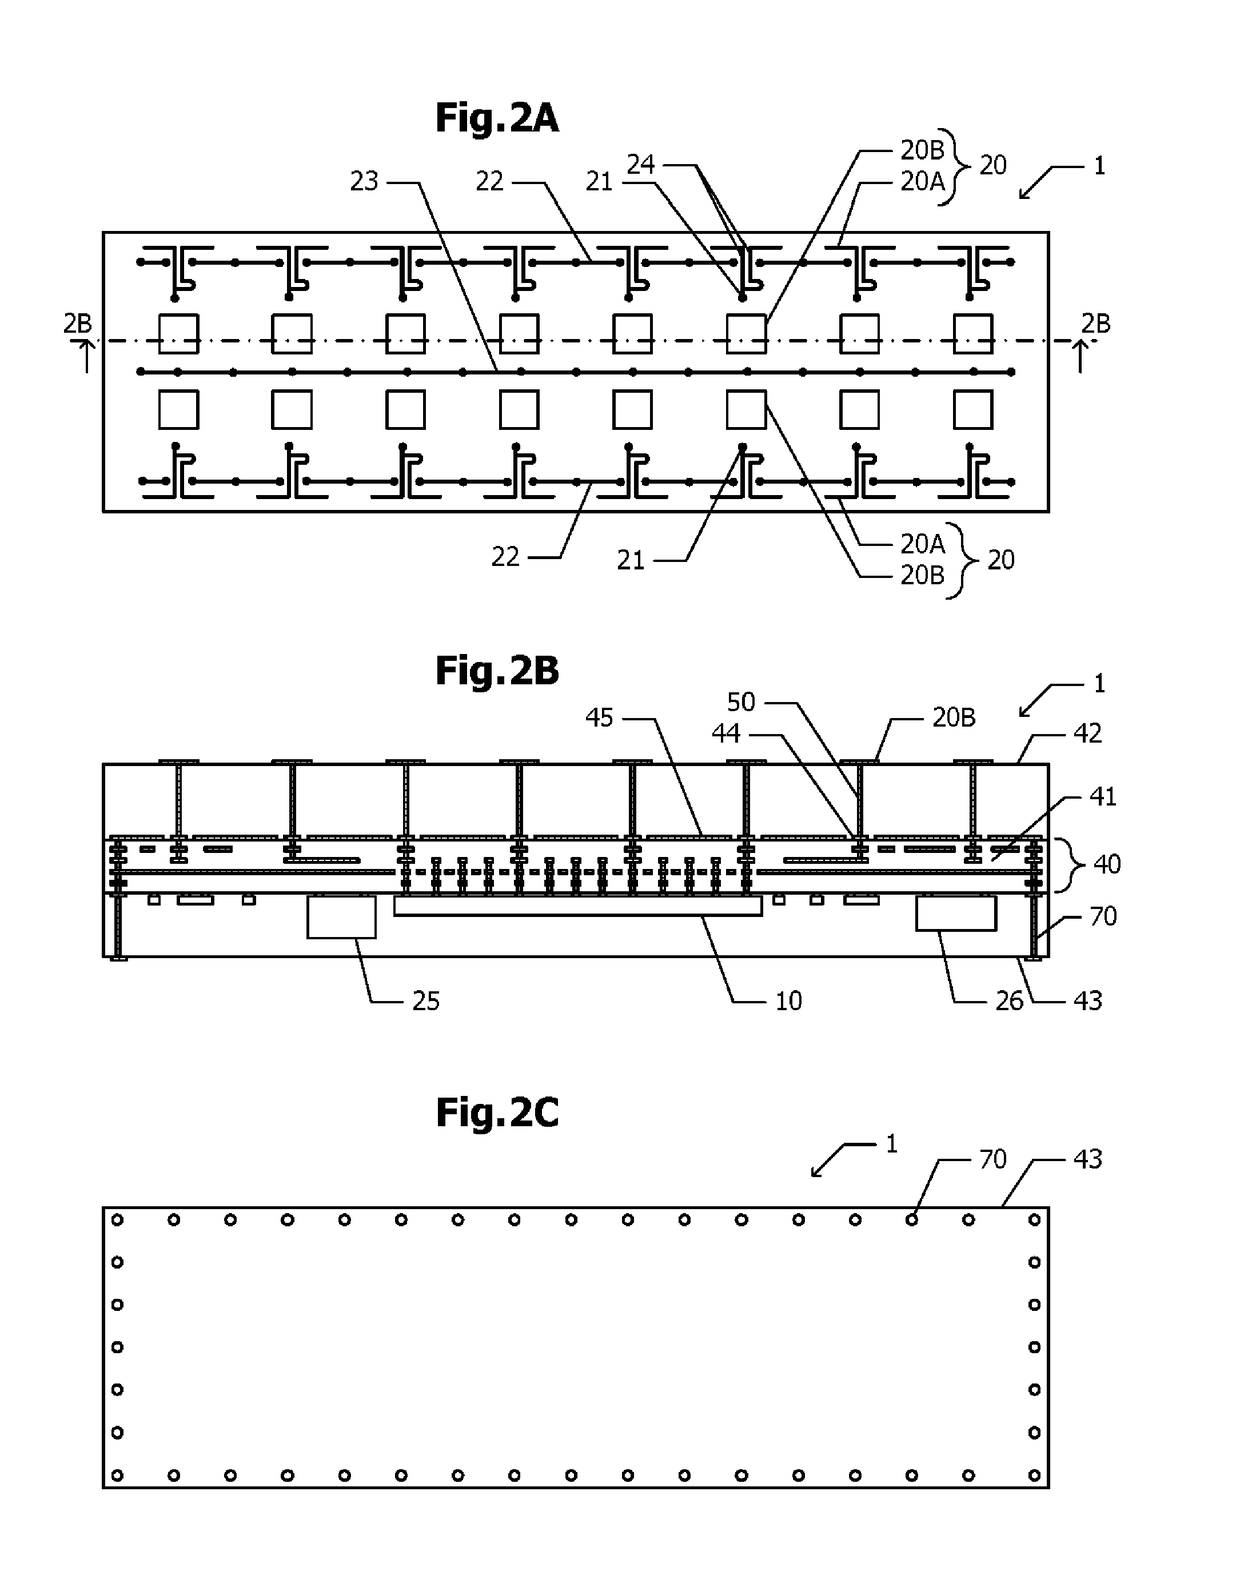 Antenna-integrated type communication module and manufacturing method for the same